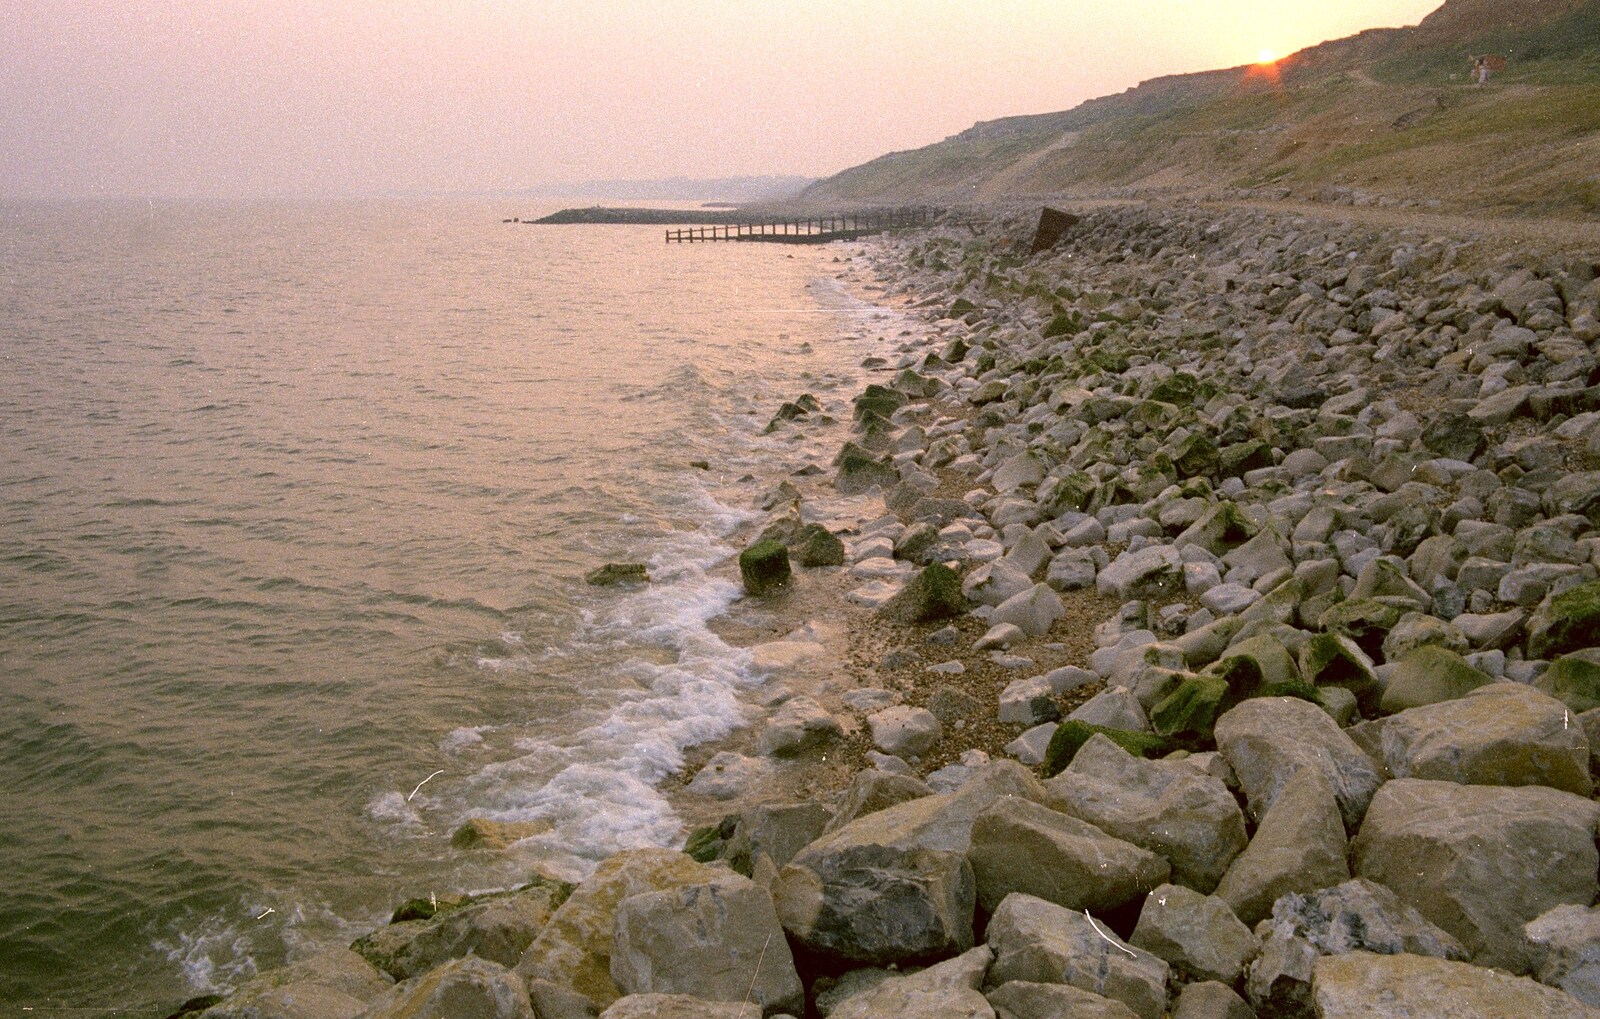 The sun sets over the cliffs at Barton on Sea from On the Beach Again and the CB Gang at the Pub, Barton on Sea and Hordle, Hampshire - 12th July 1986